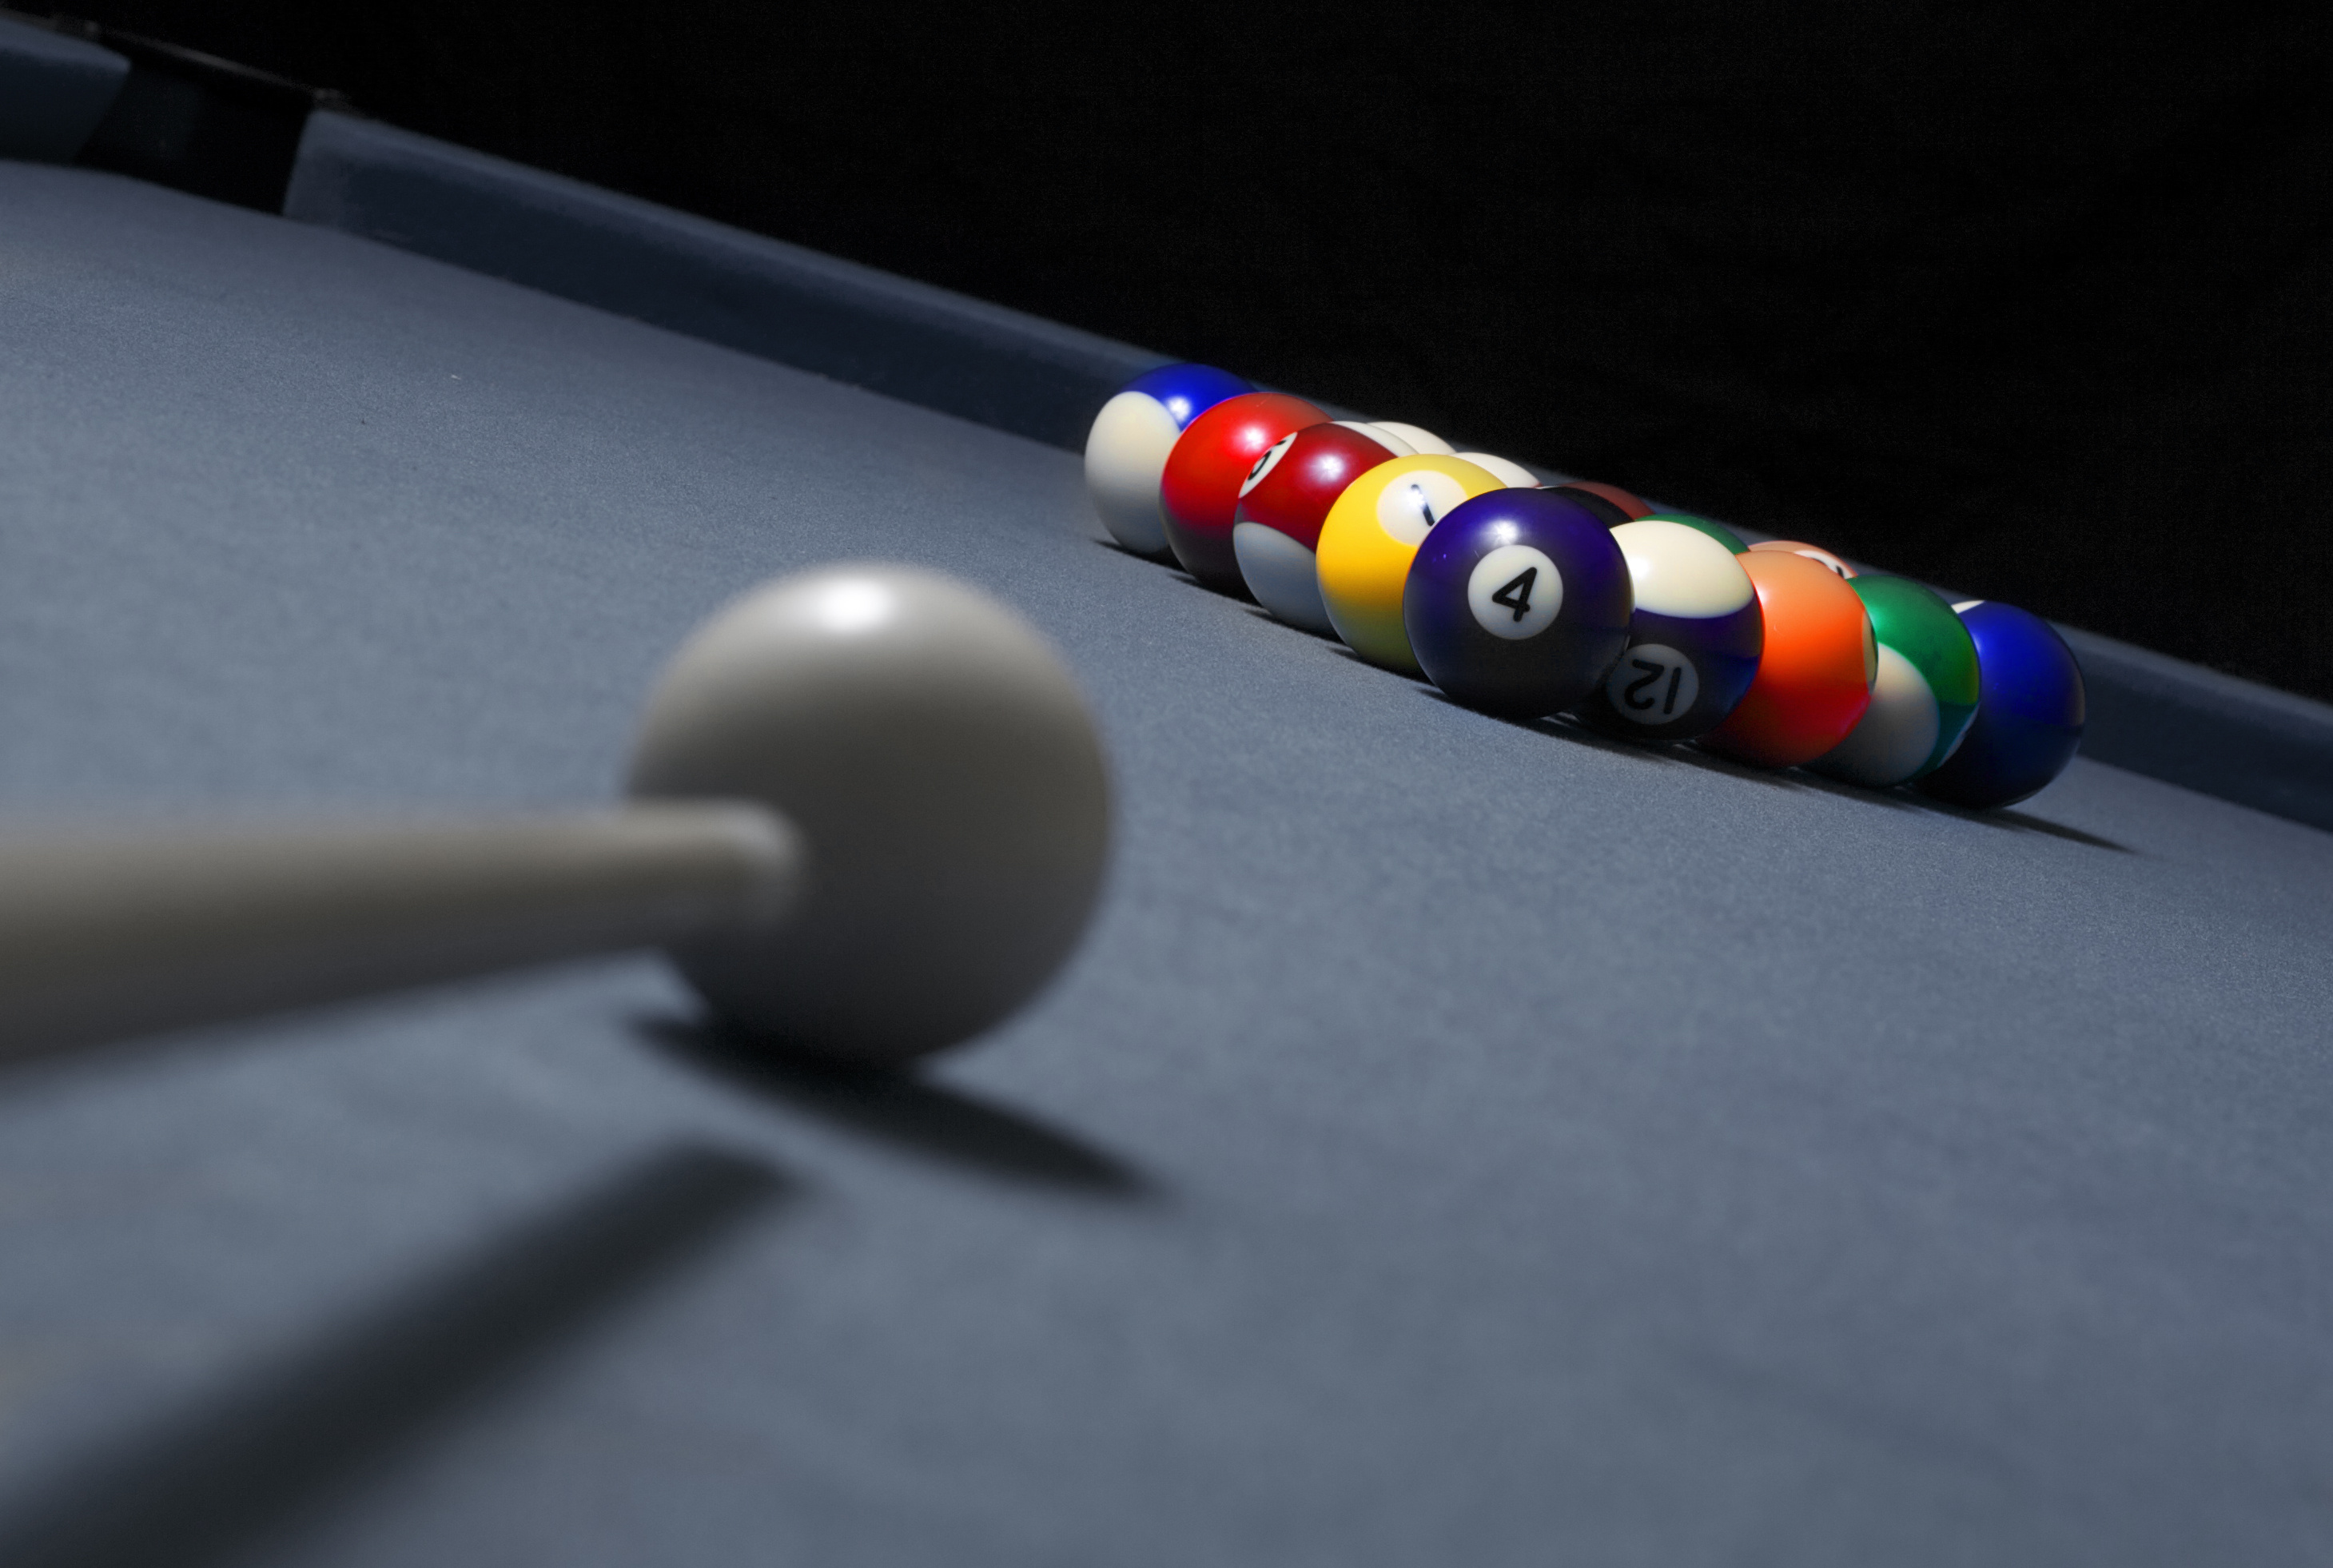 Pool (Cue Sports): Classic eight-ball, Seven solid-colored balls, seven striped balls, and the black 8 ball. 2920x1970 HD Wallpaper.